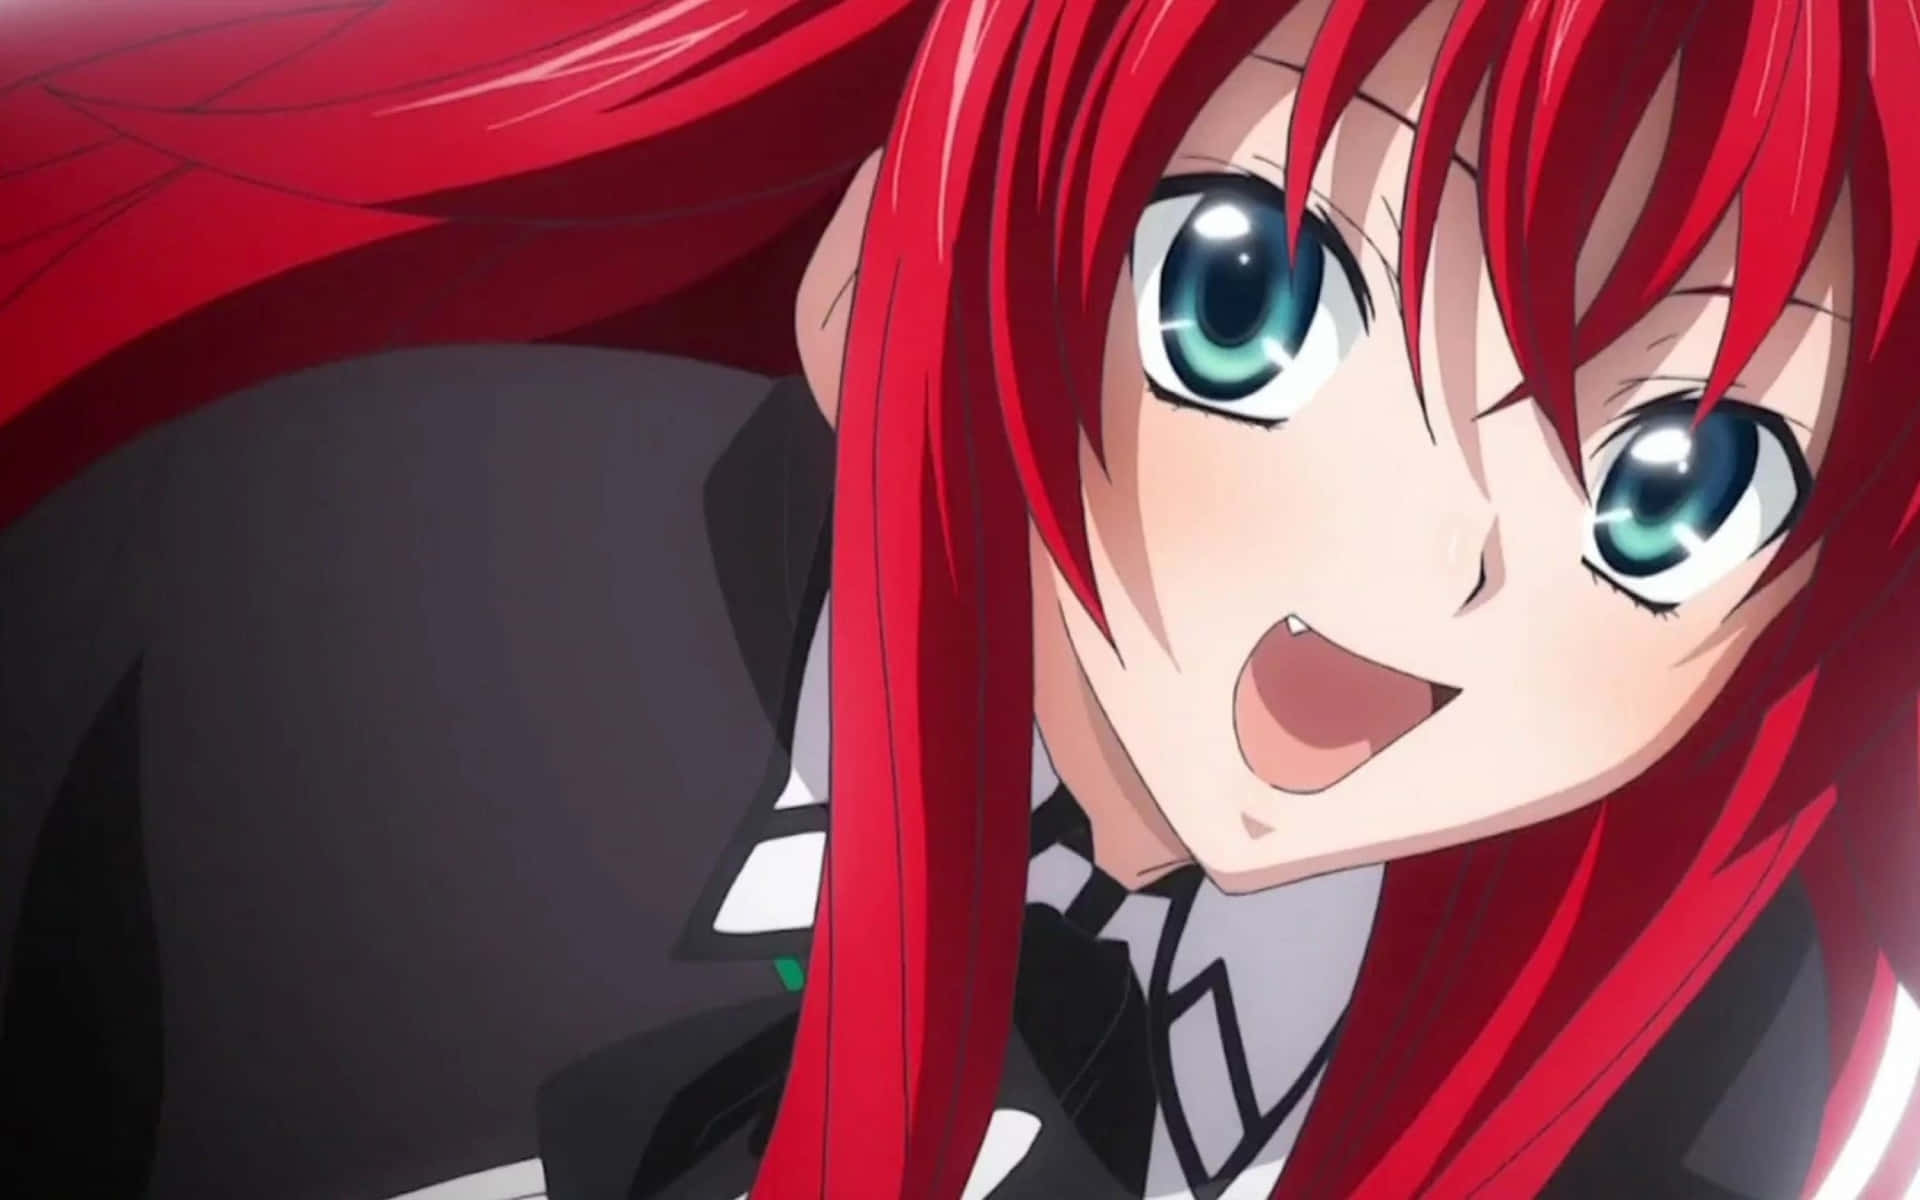 Experience the supernatural adventures of High School DxD